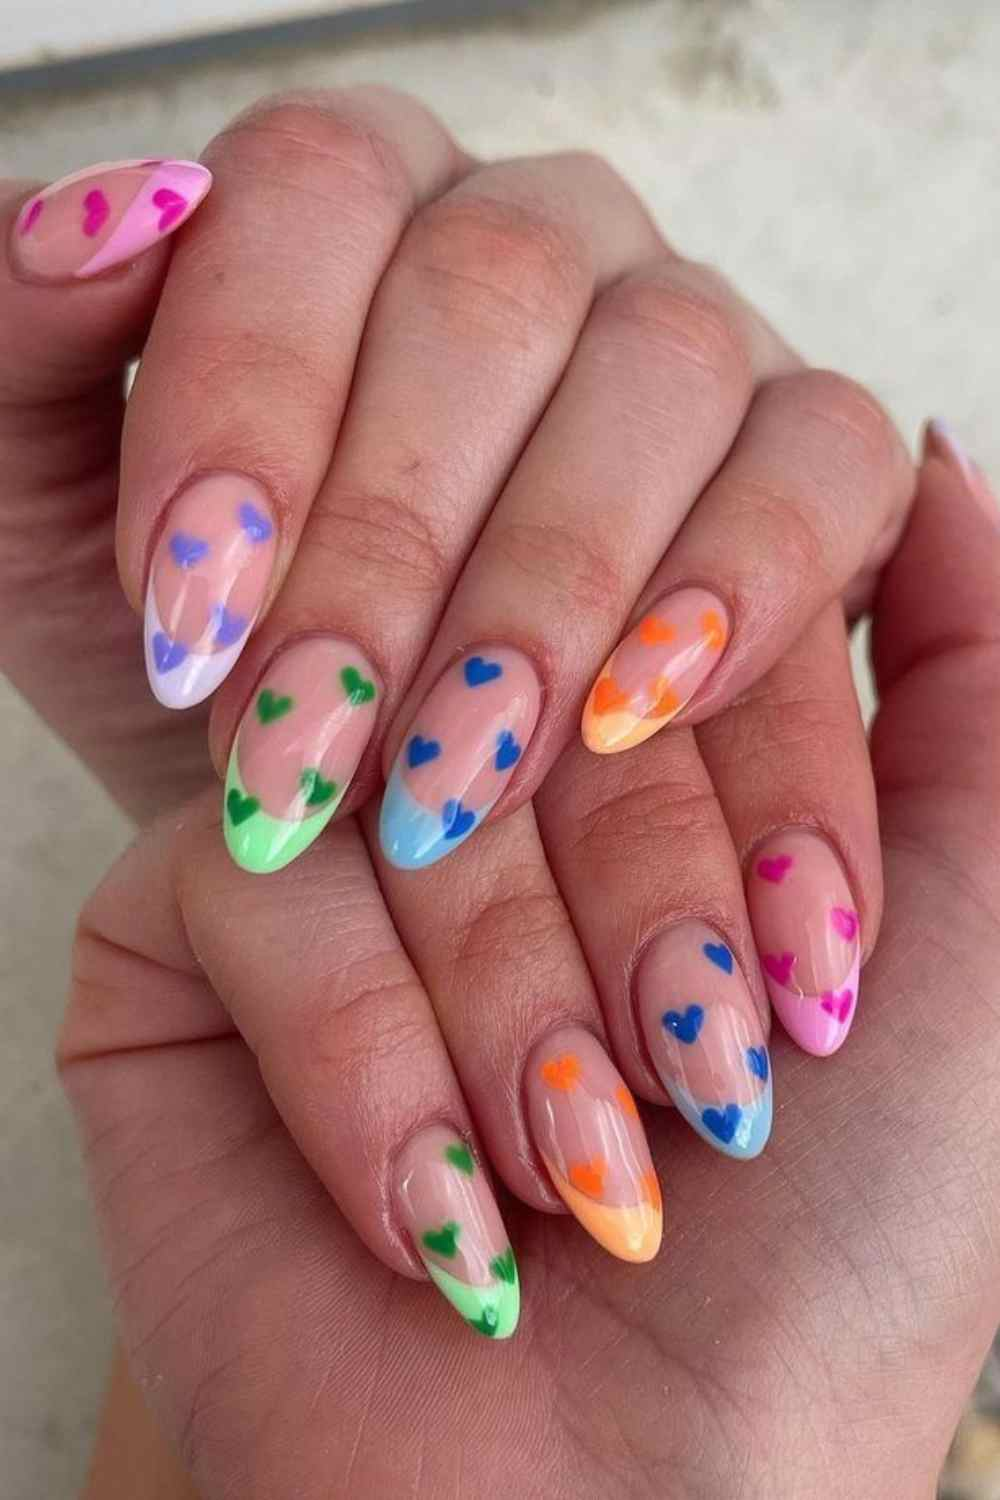 Gorgeos french tip colorful nail art - How Long Do Acrylic Nails Take?